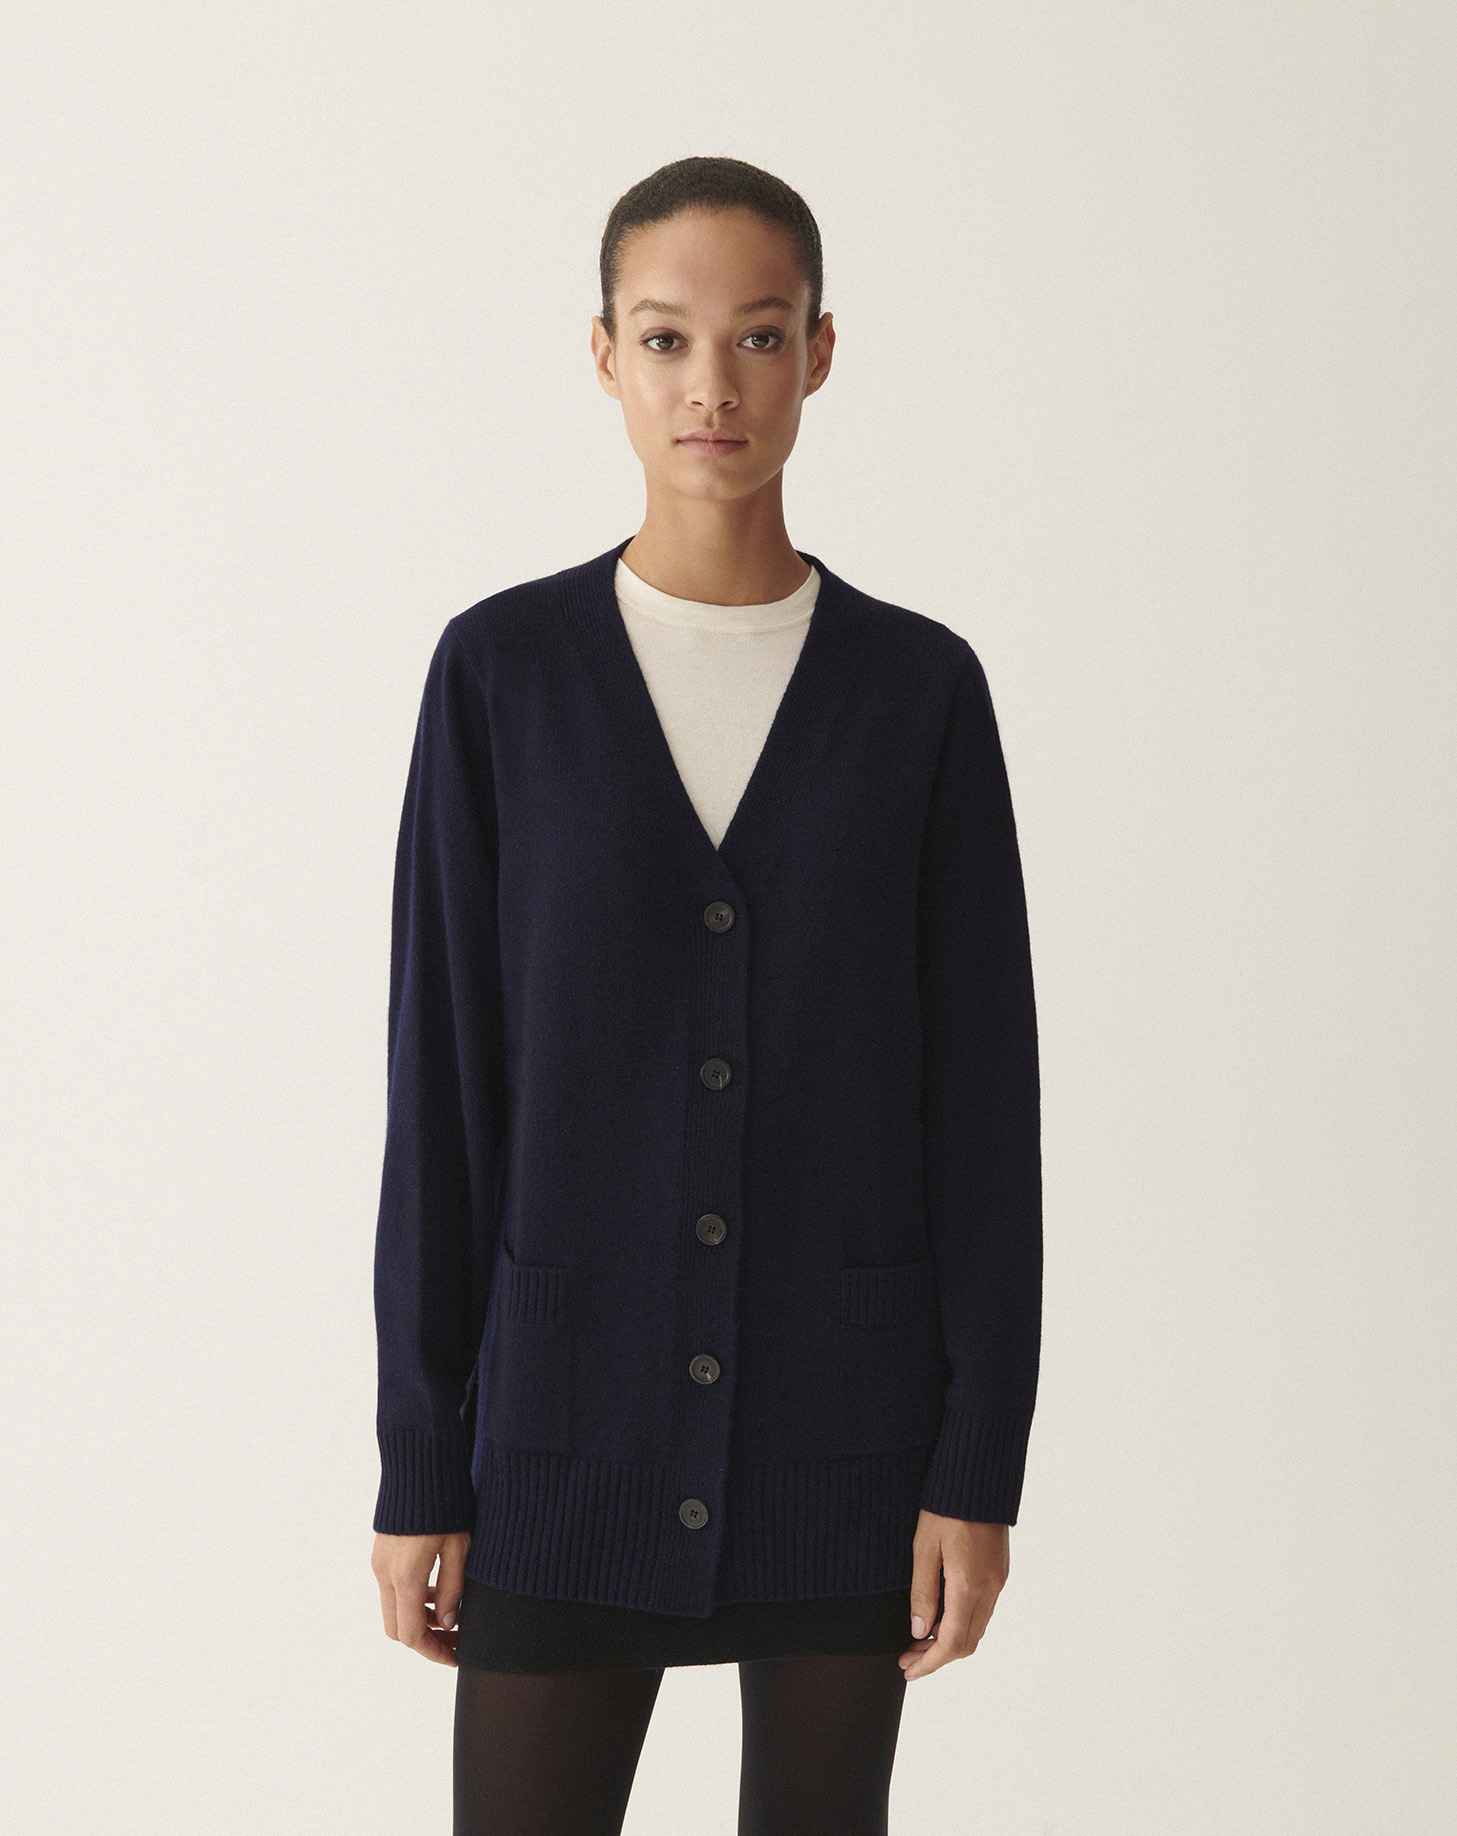 Loose cardigan with pockets and side slits